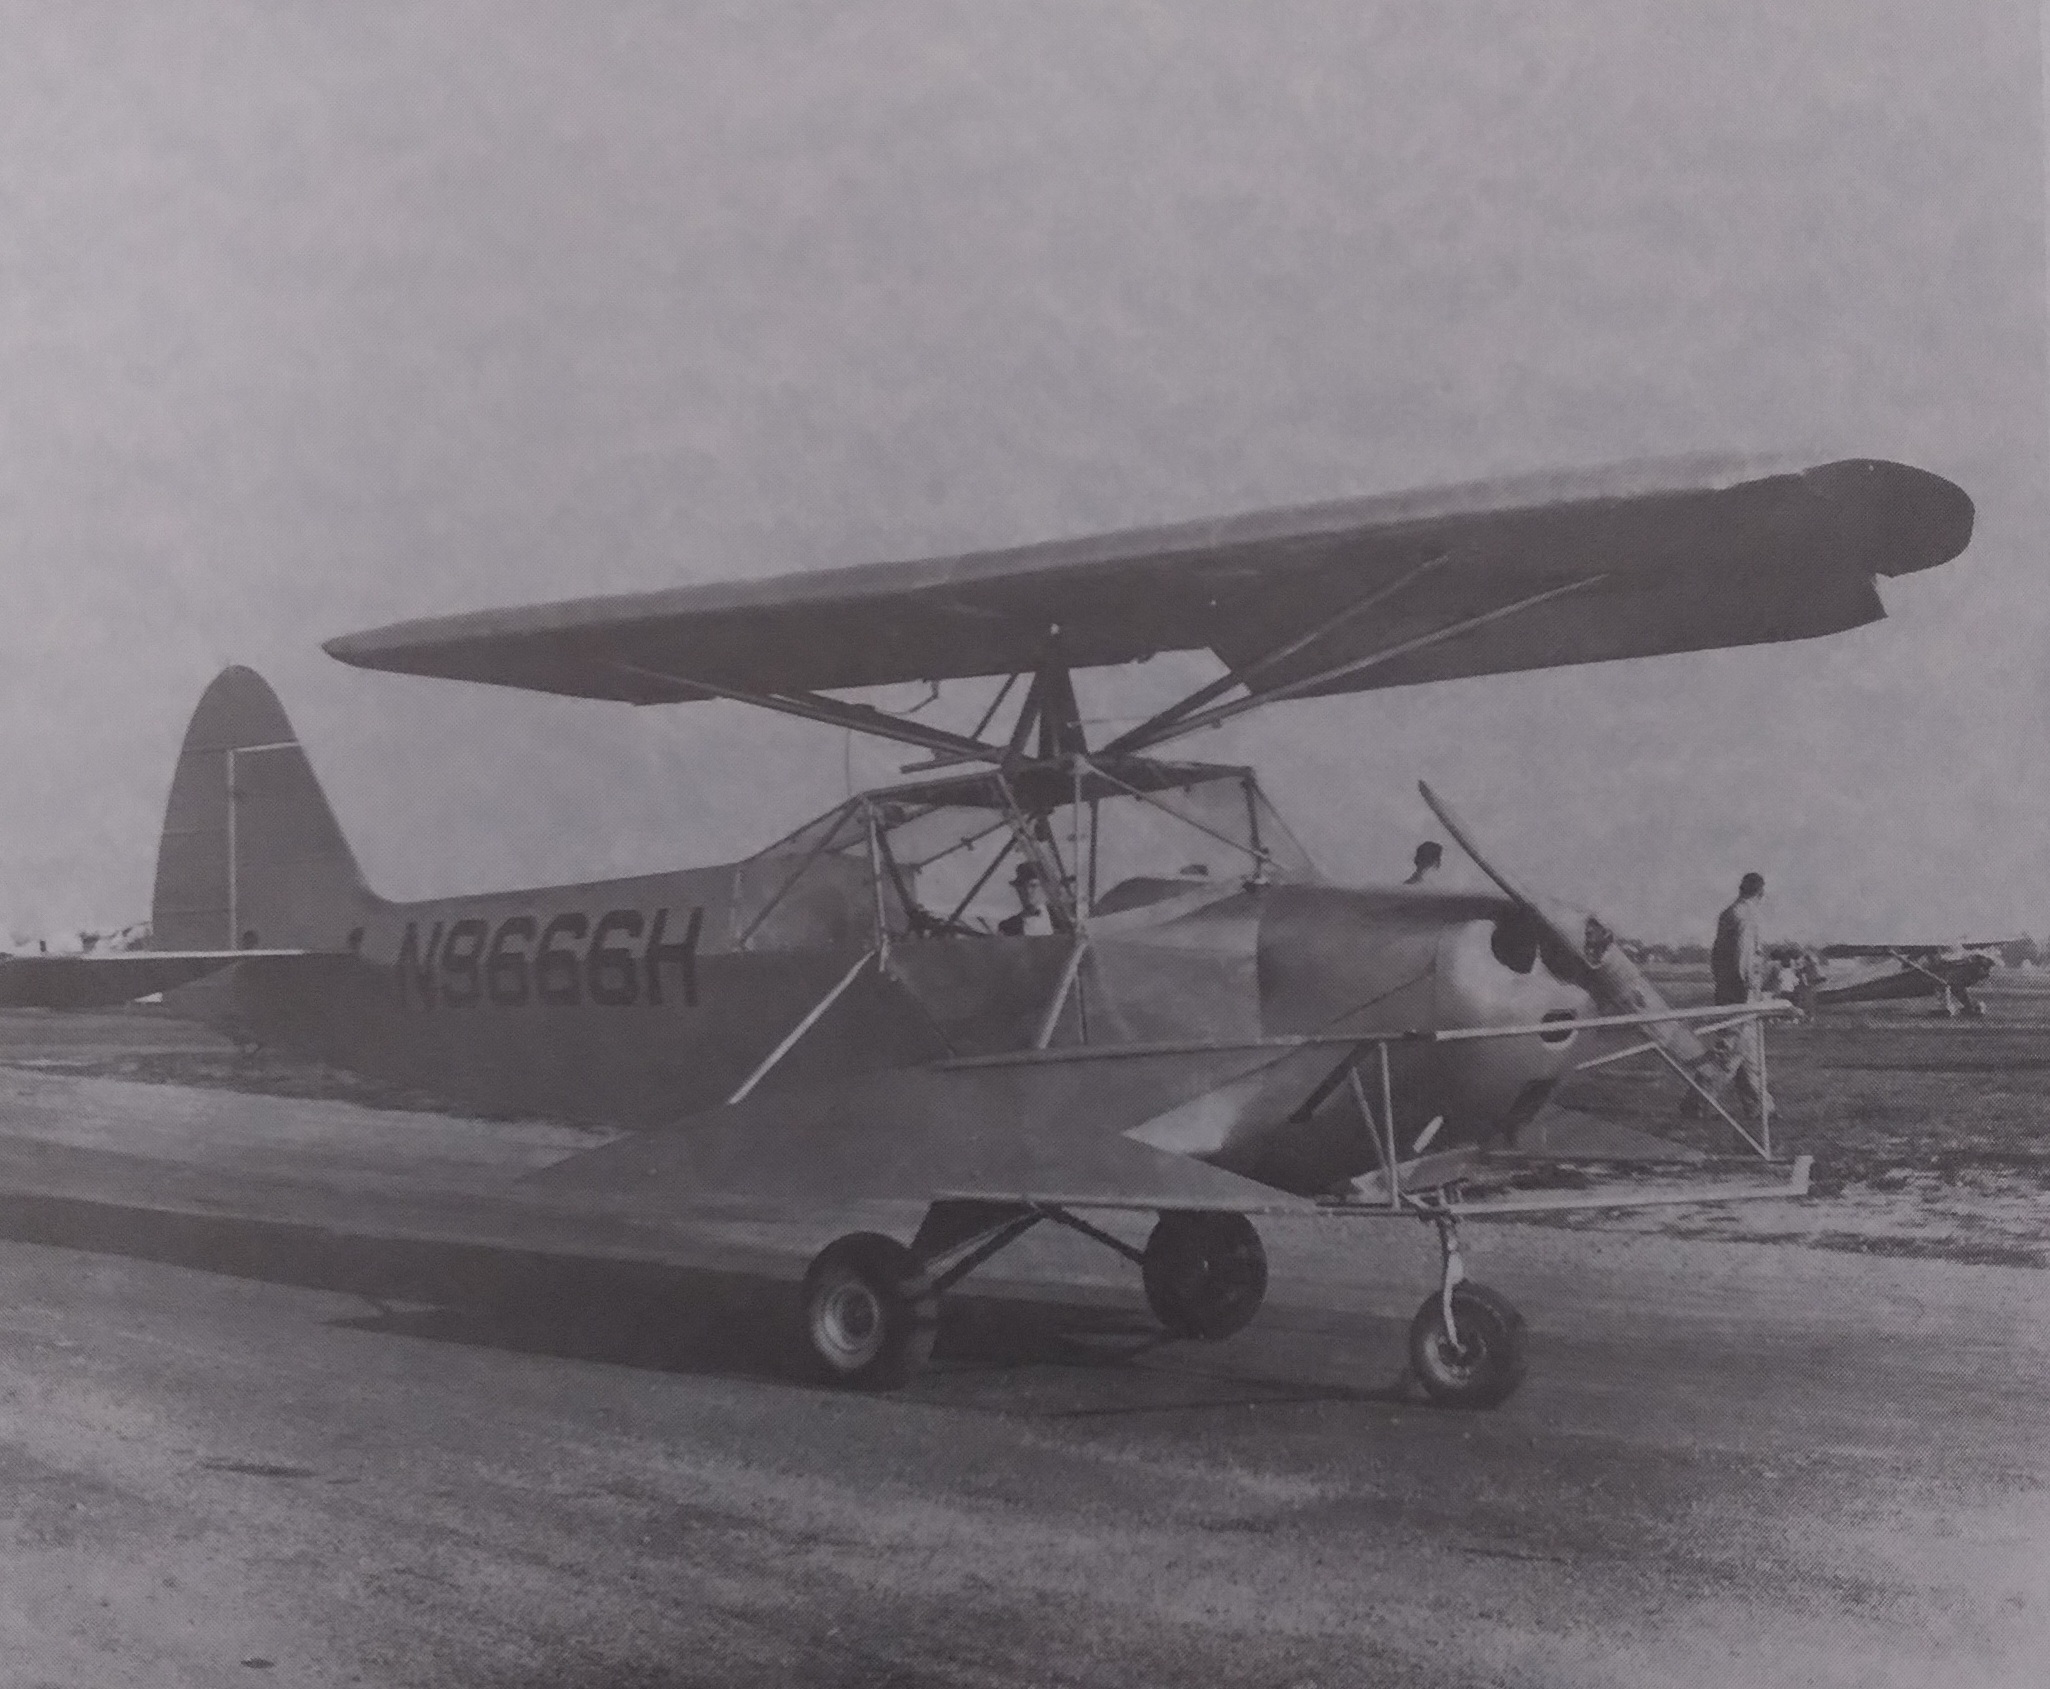 An early airplane model